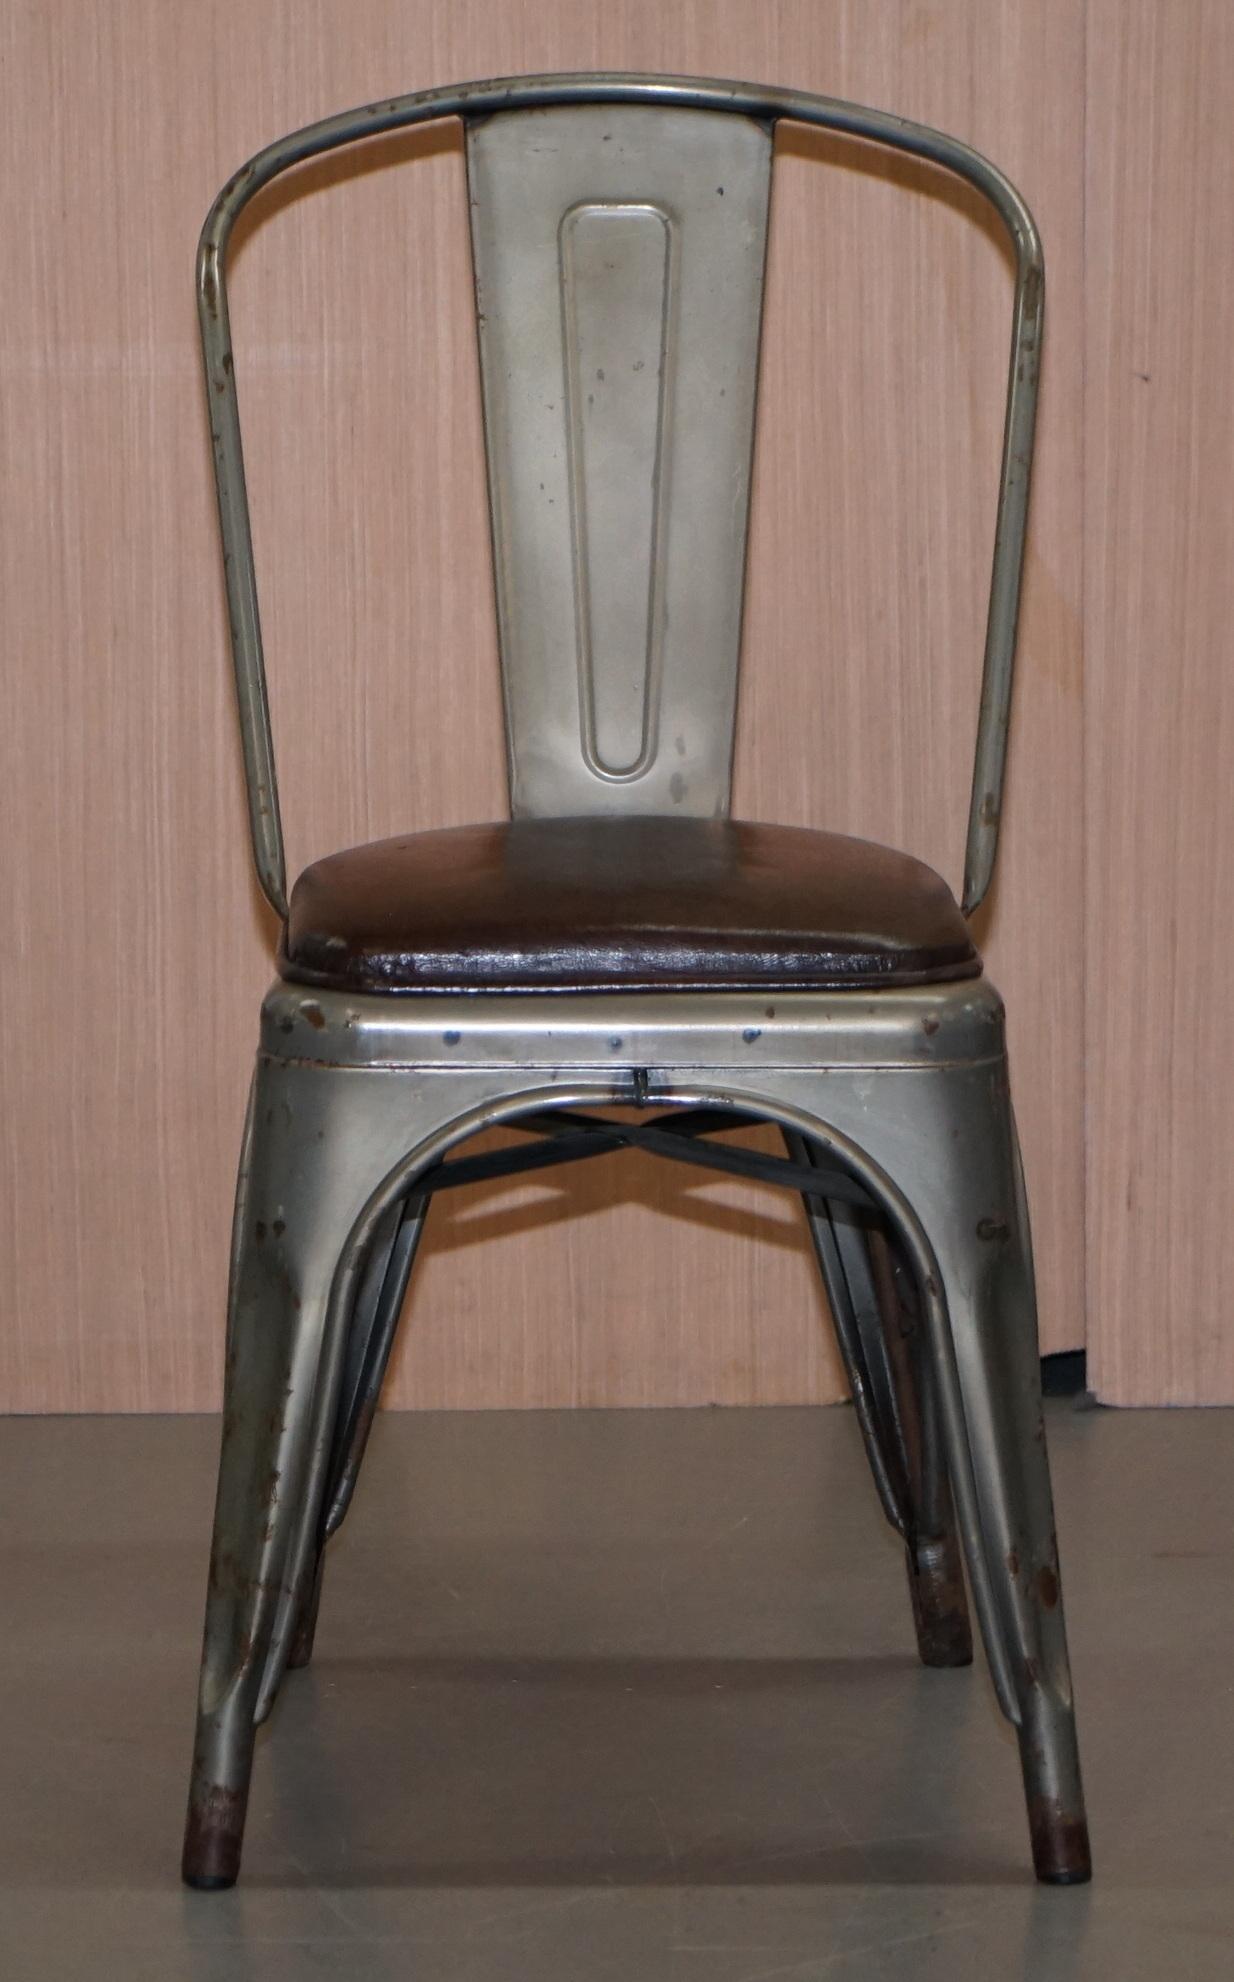 English Set of Four Gun Metal Grey Stacking Chairs Tolix V2 with Upholstered Seat Pad